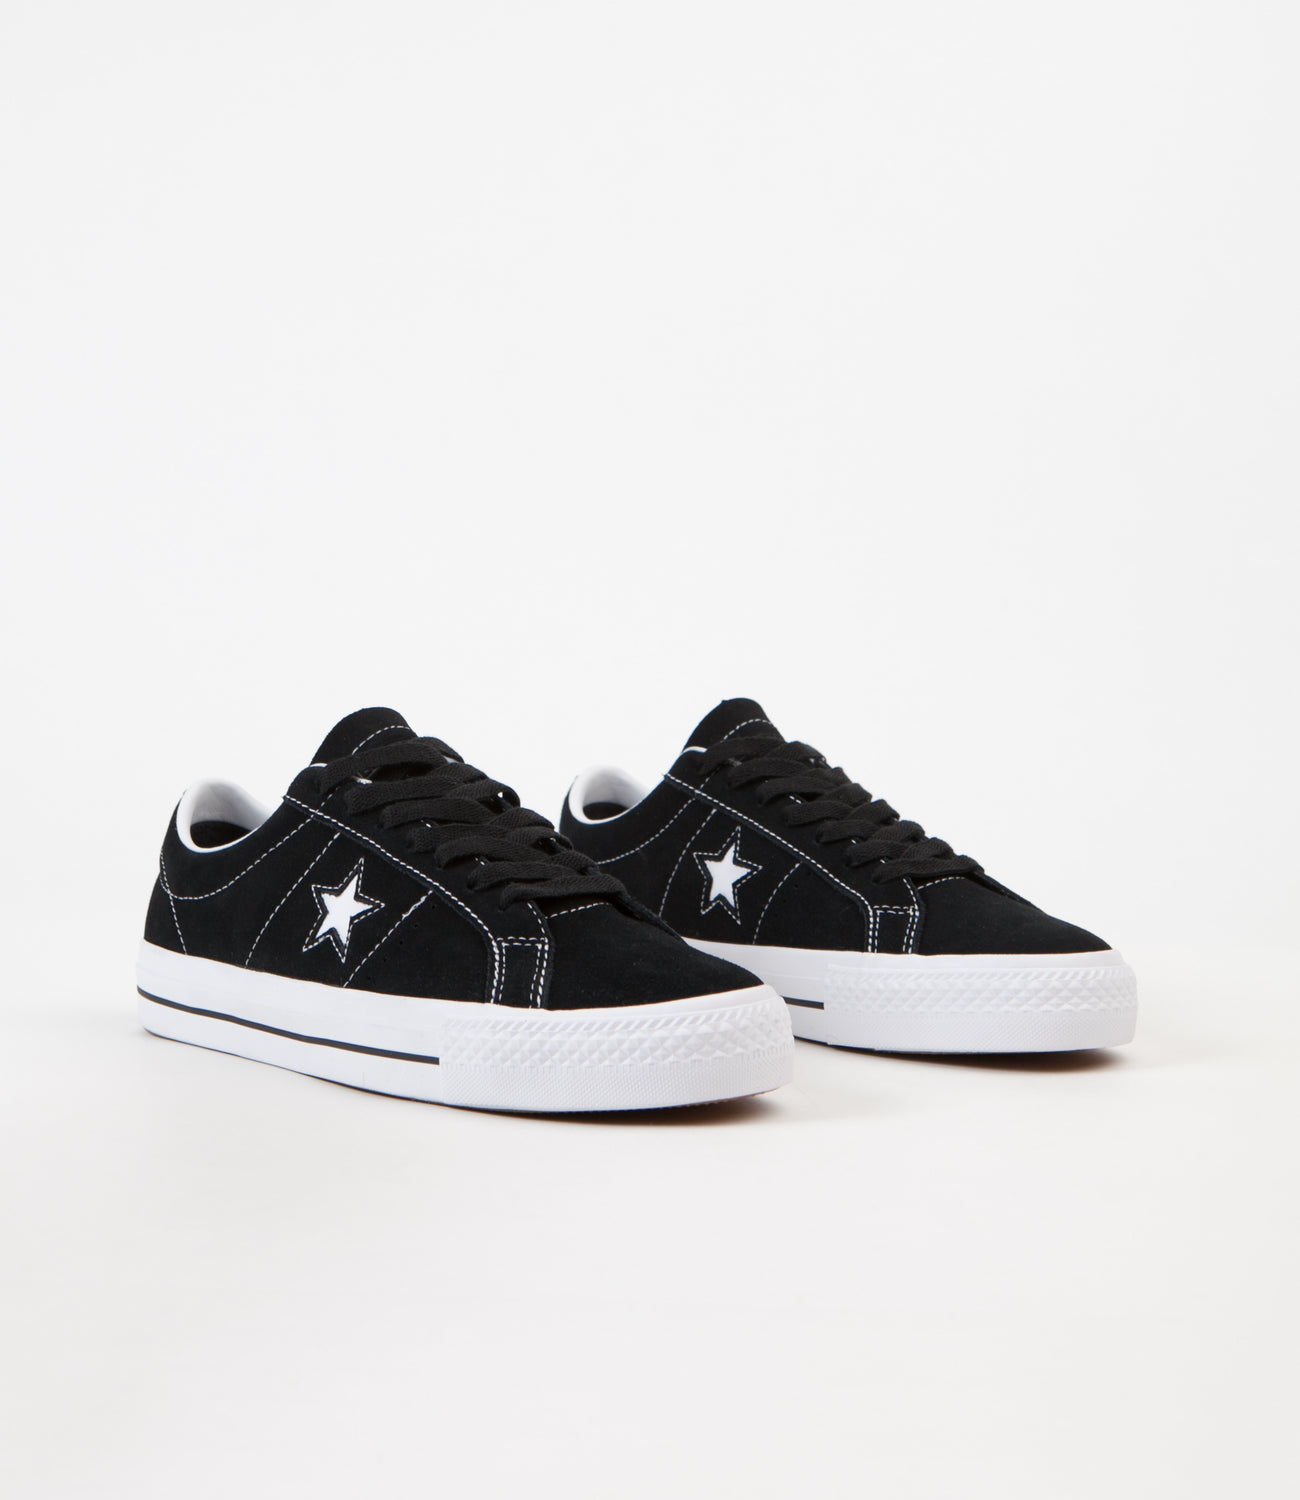 converse one star ox white low top shoes